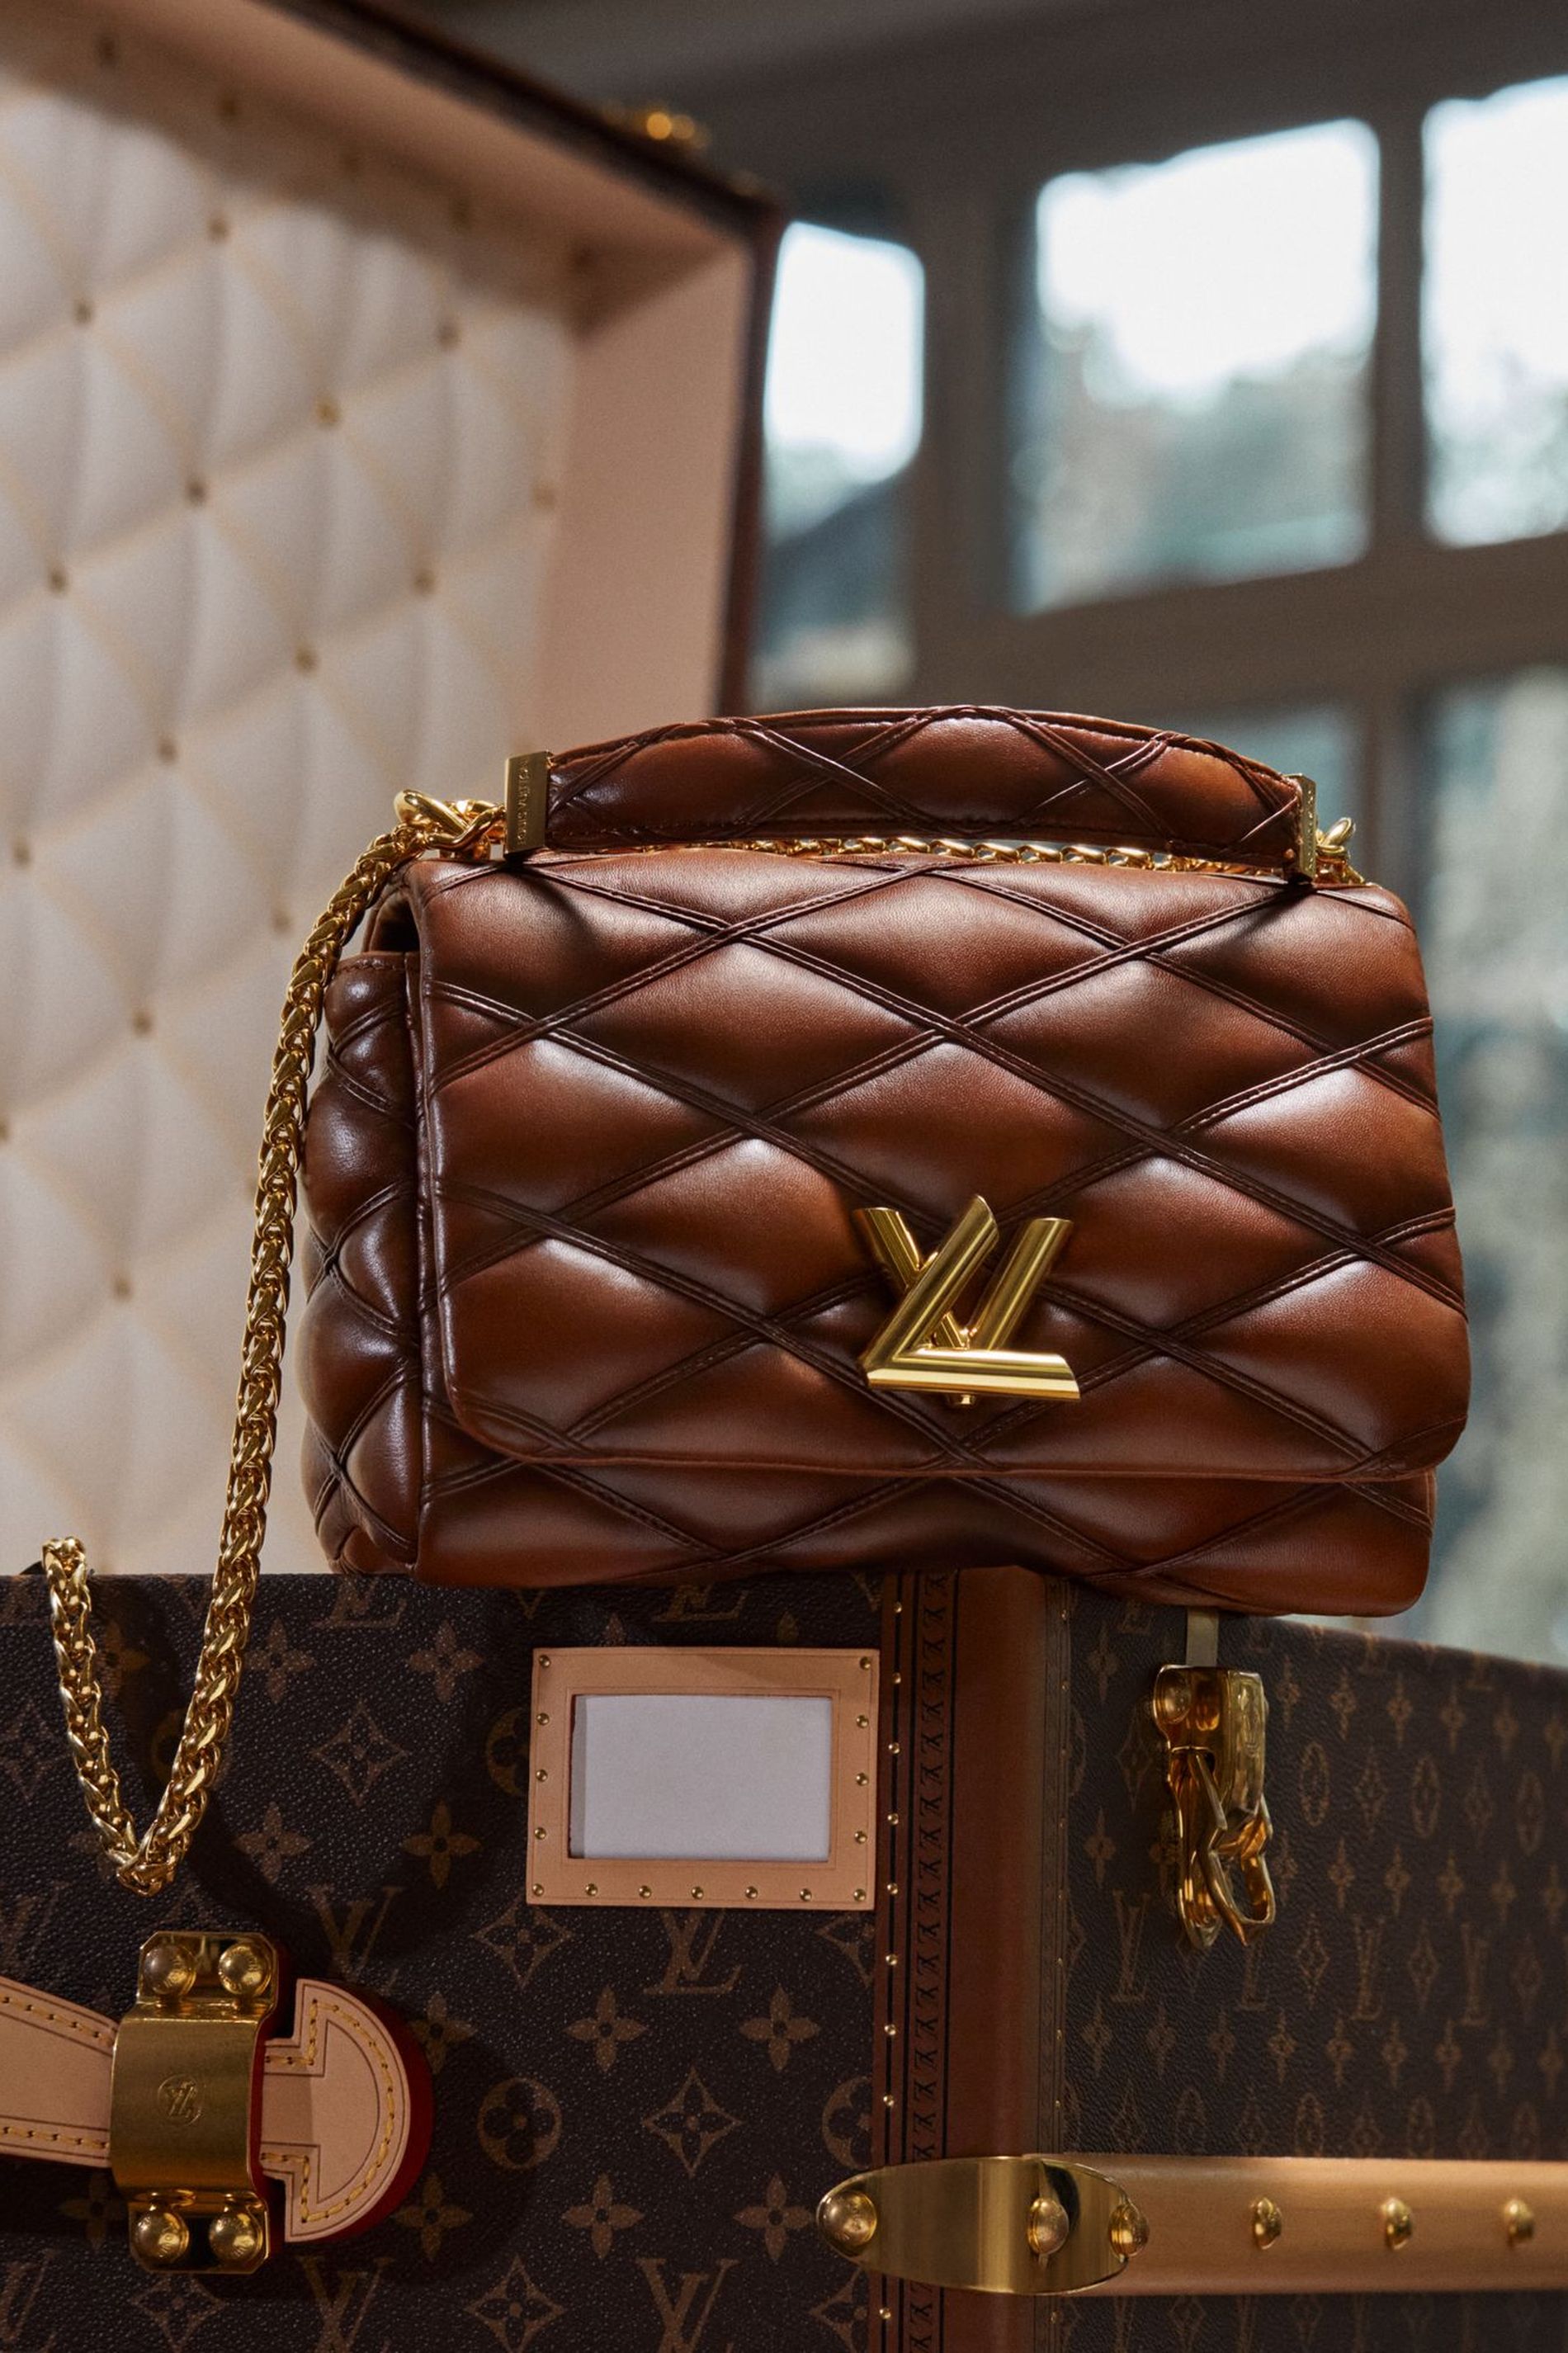 August Fashion News: Louis Vuitton's GO-14 is the trunk-inspired baggage we  want this autumn - Vogue Scandinavia